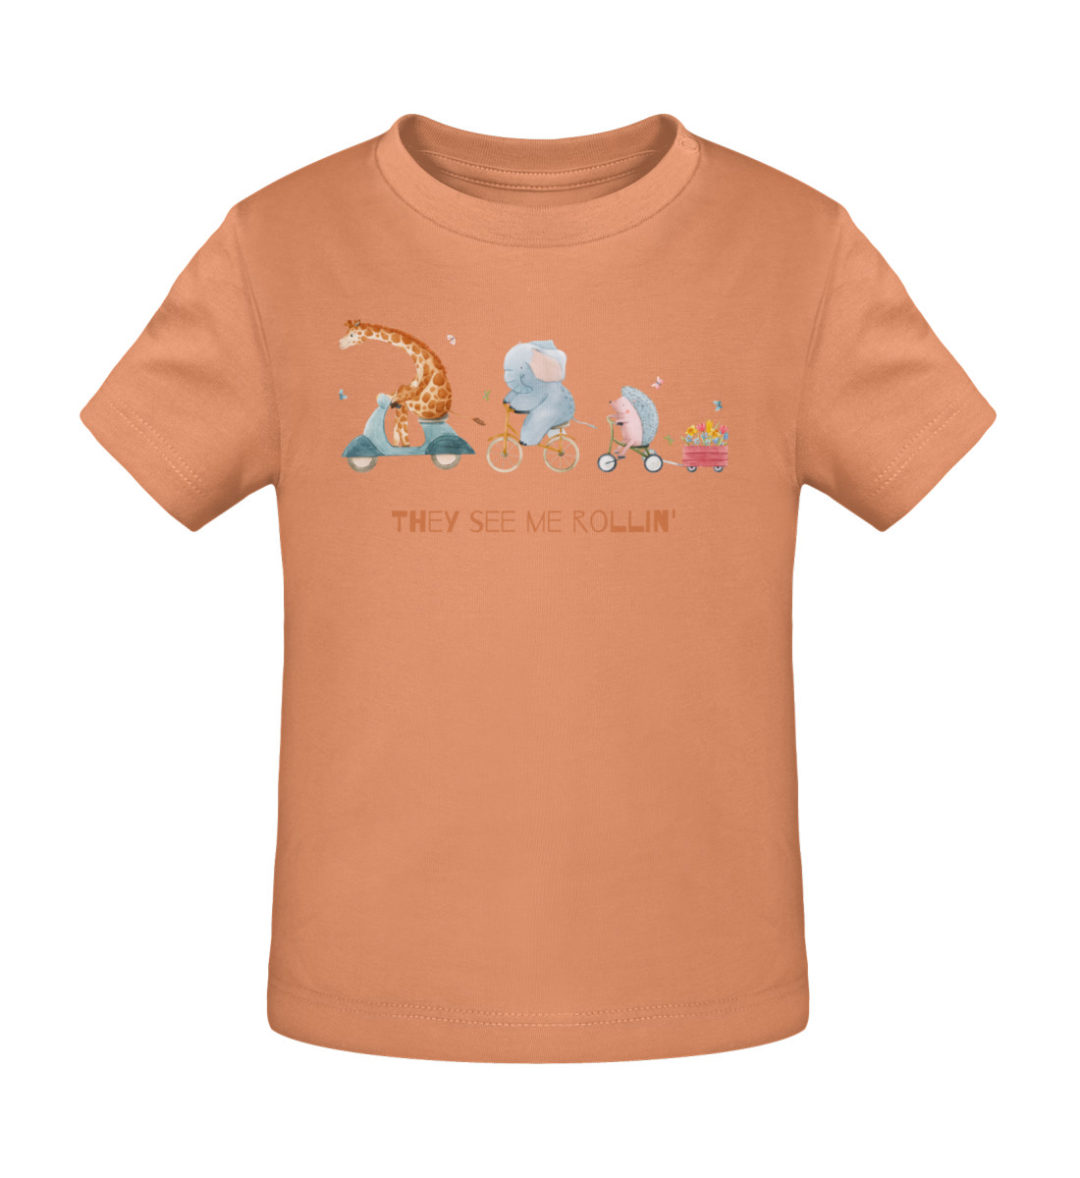 They see me rollin- - Baby Creator T-Shirt ST/ST-7101